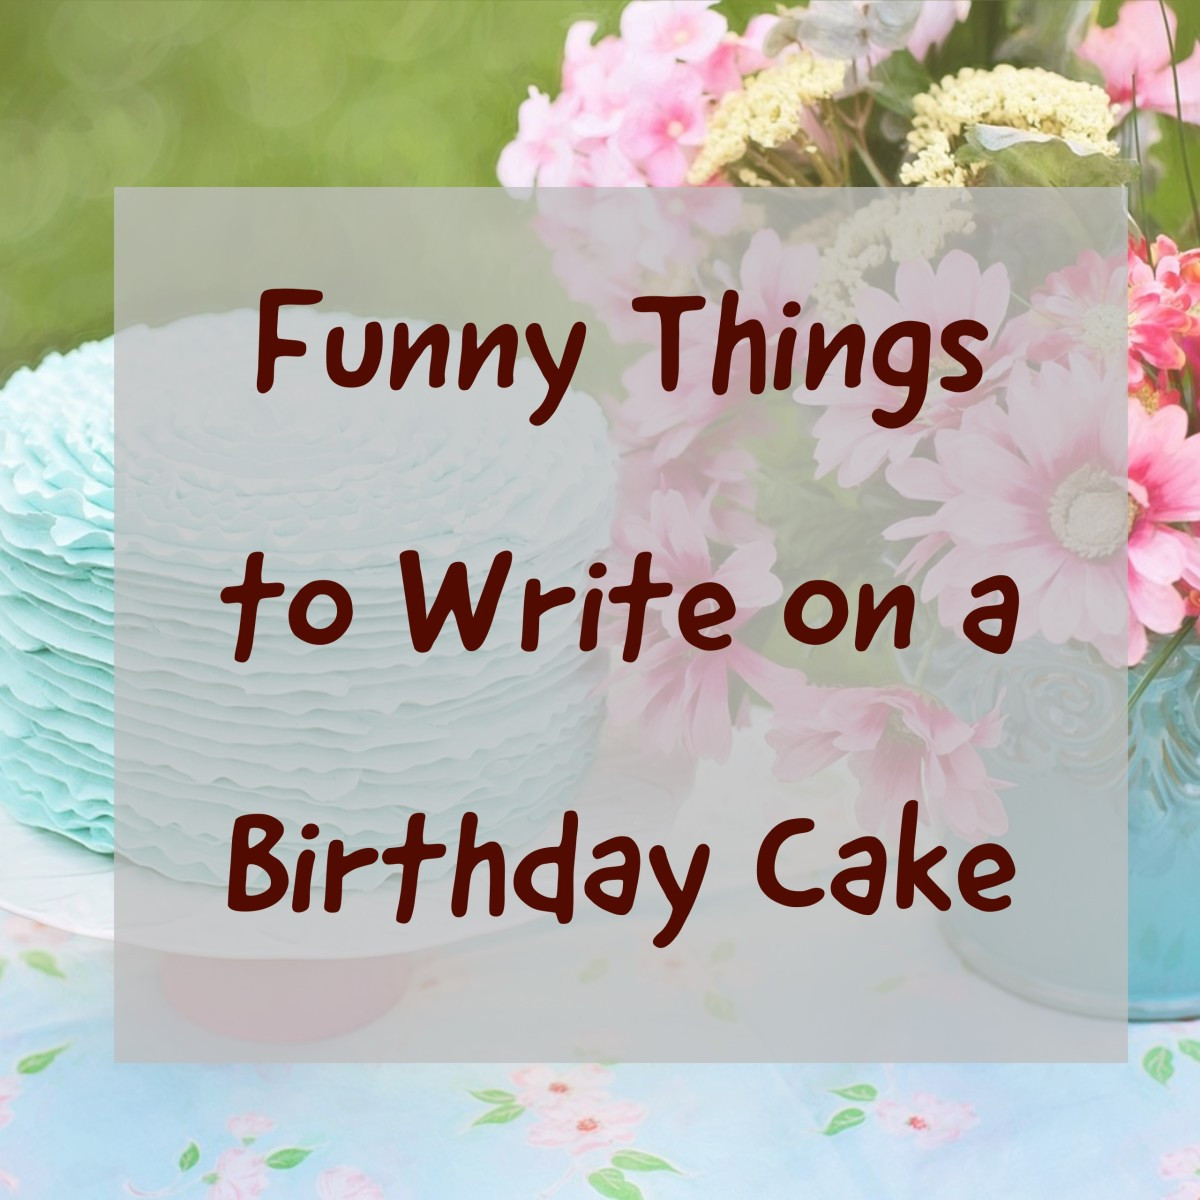 Birthday Cake Quotes
 Over 100 Funny Things to Write on a Birthday Cake